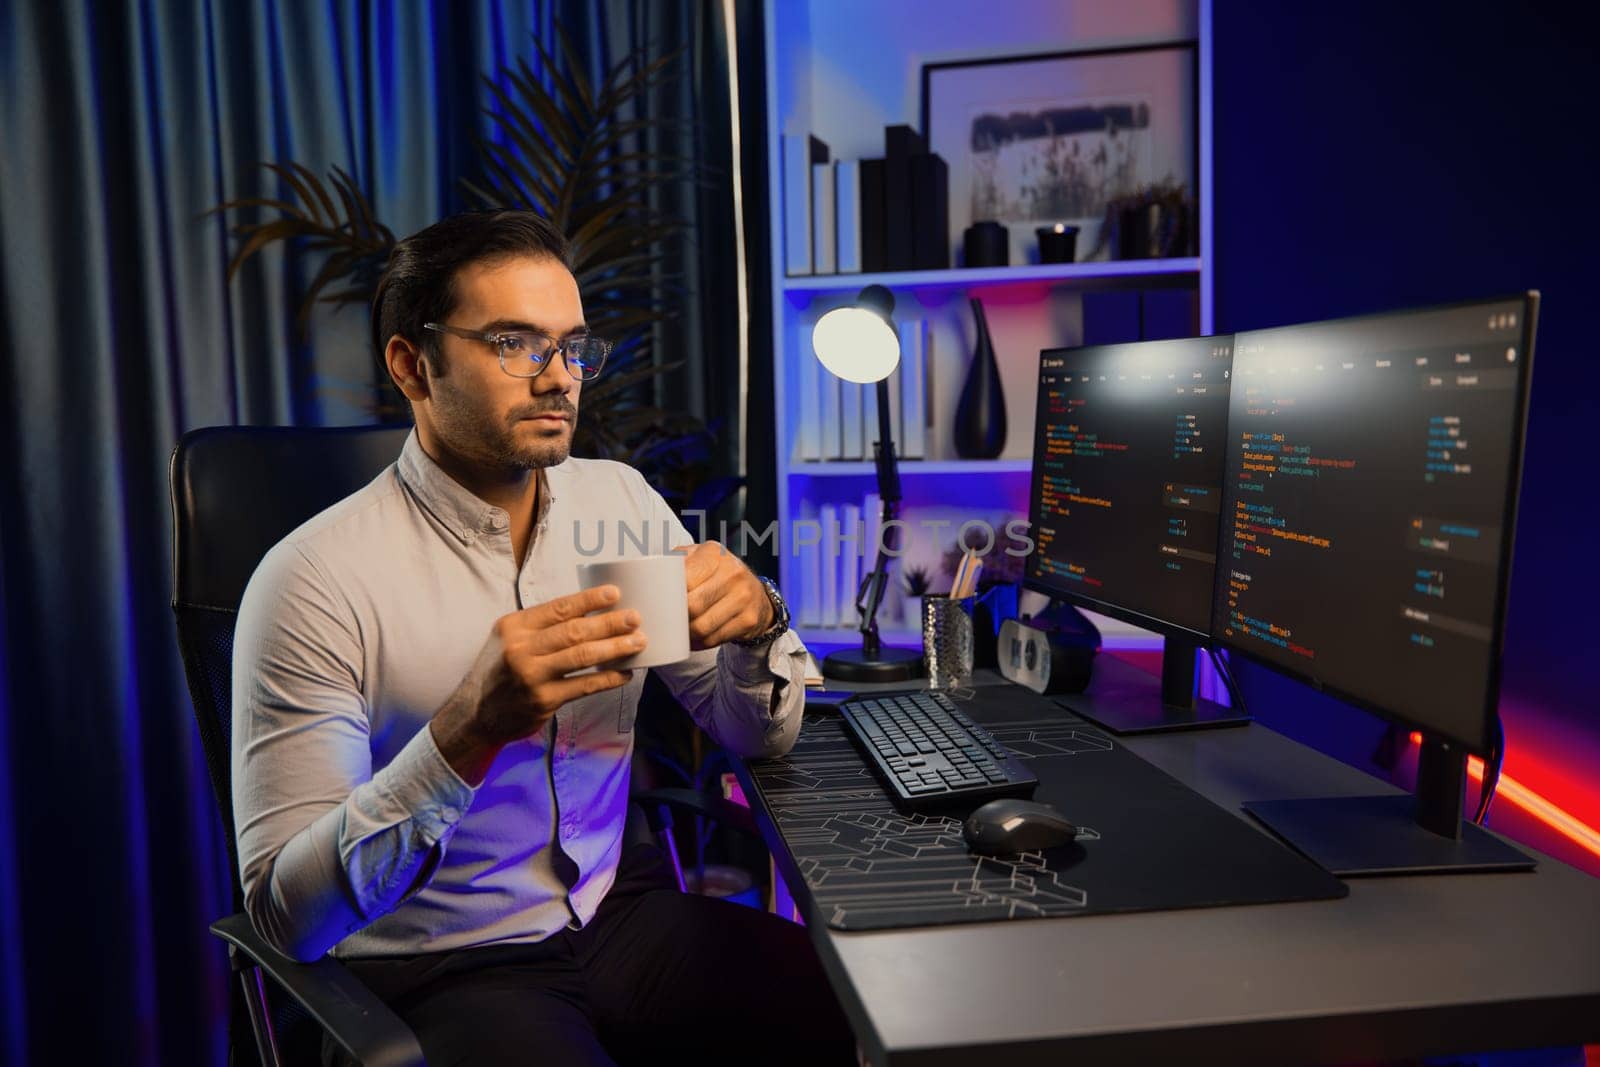 Smart IT developer drinking coffee cup while working in software development coding on pc screen, presenting program application update online website database at neon lighting cyber office. Surmise.